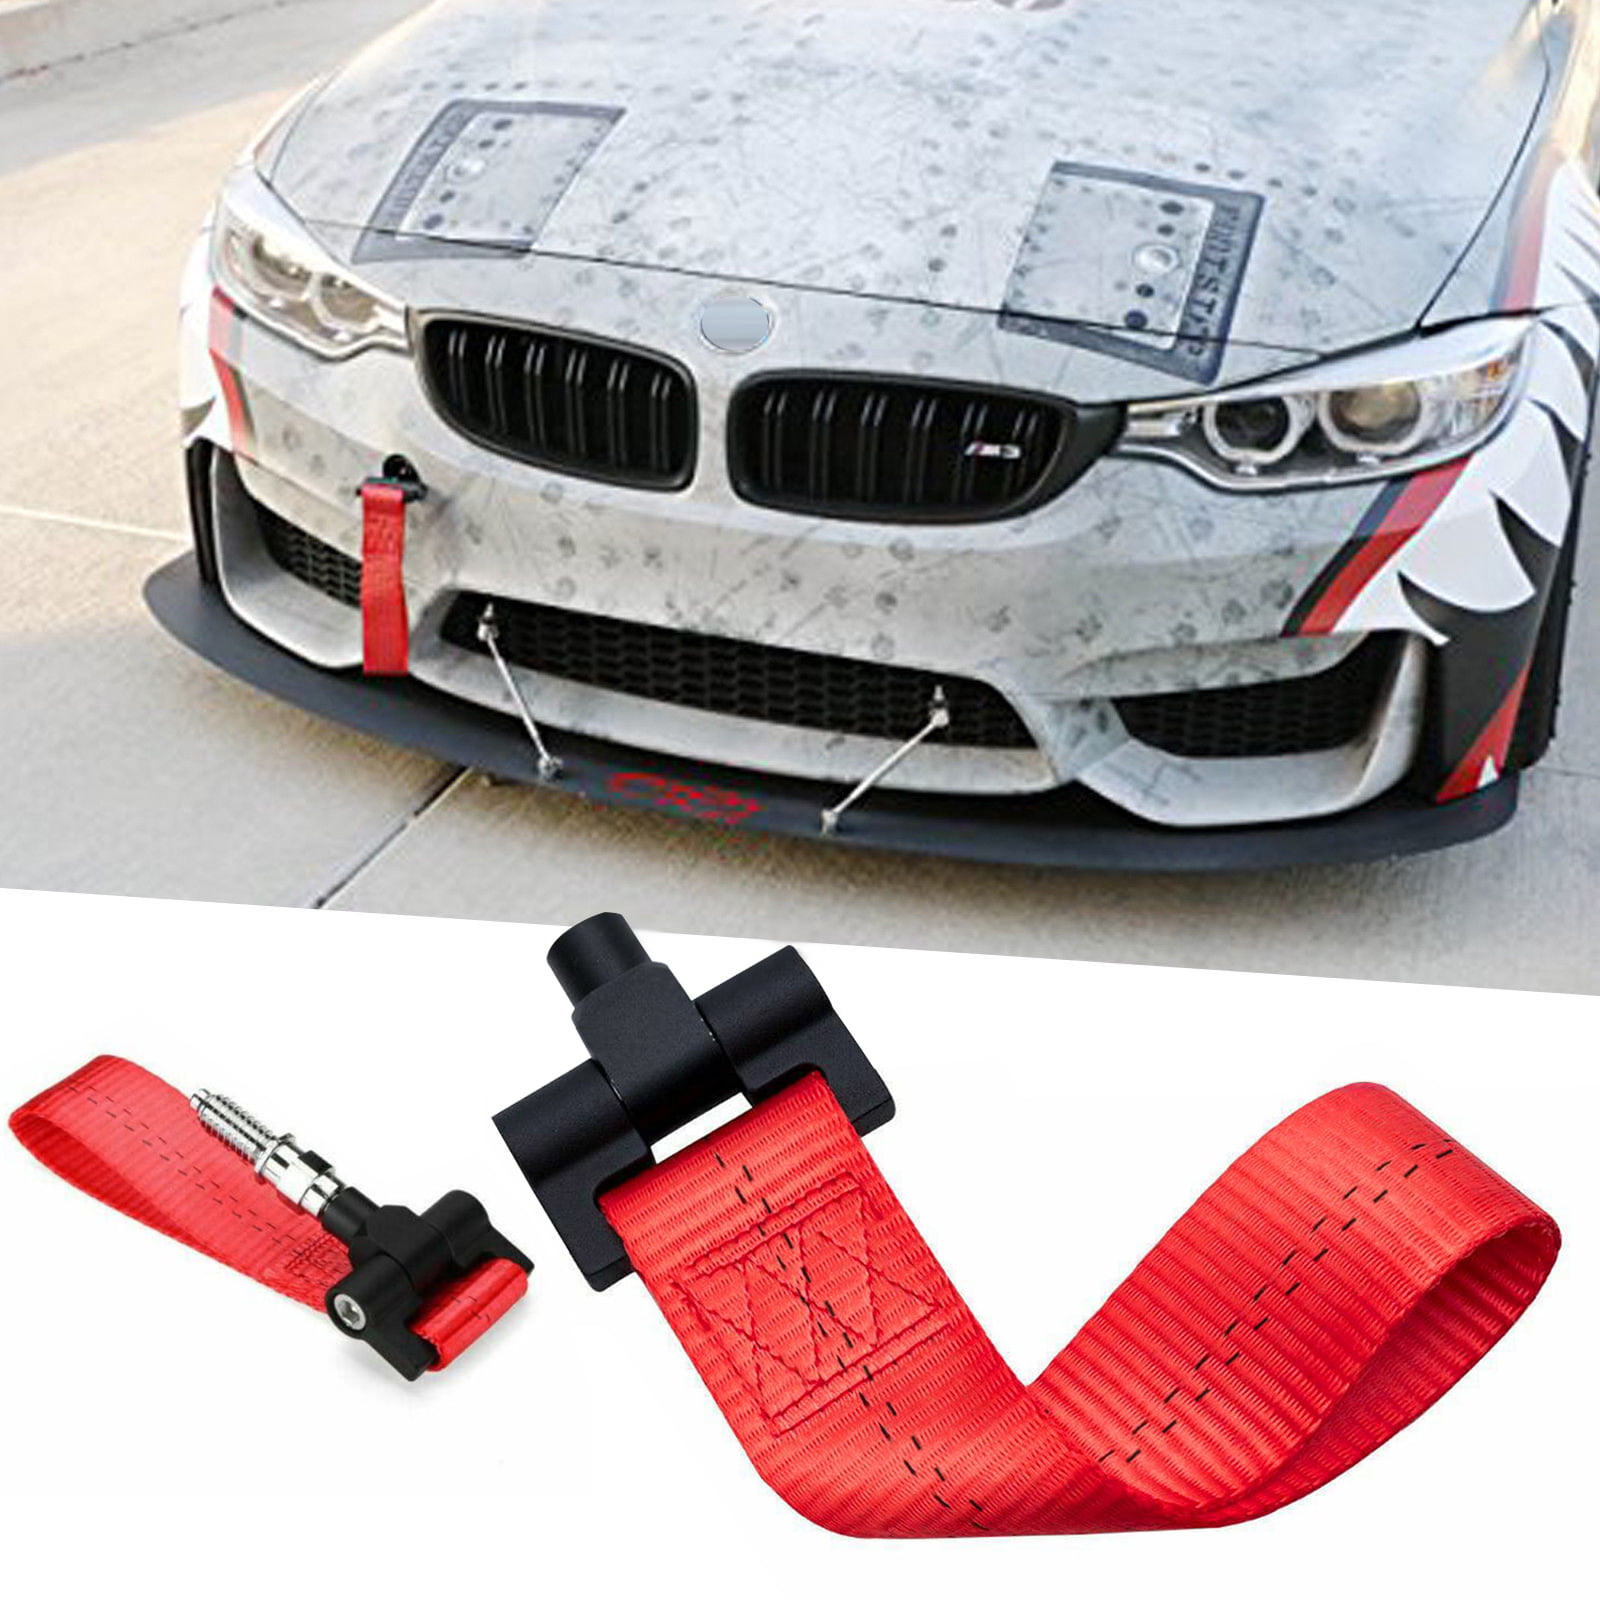 Xotic Tech Red JDM Style Tow Hole Adapter with Towing Strap for BMW X1 X3 X4 X5 X6 2 3 4 5 Fxx Series 2012+ 